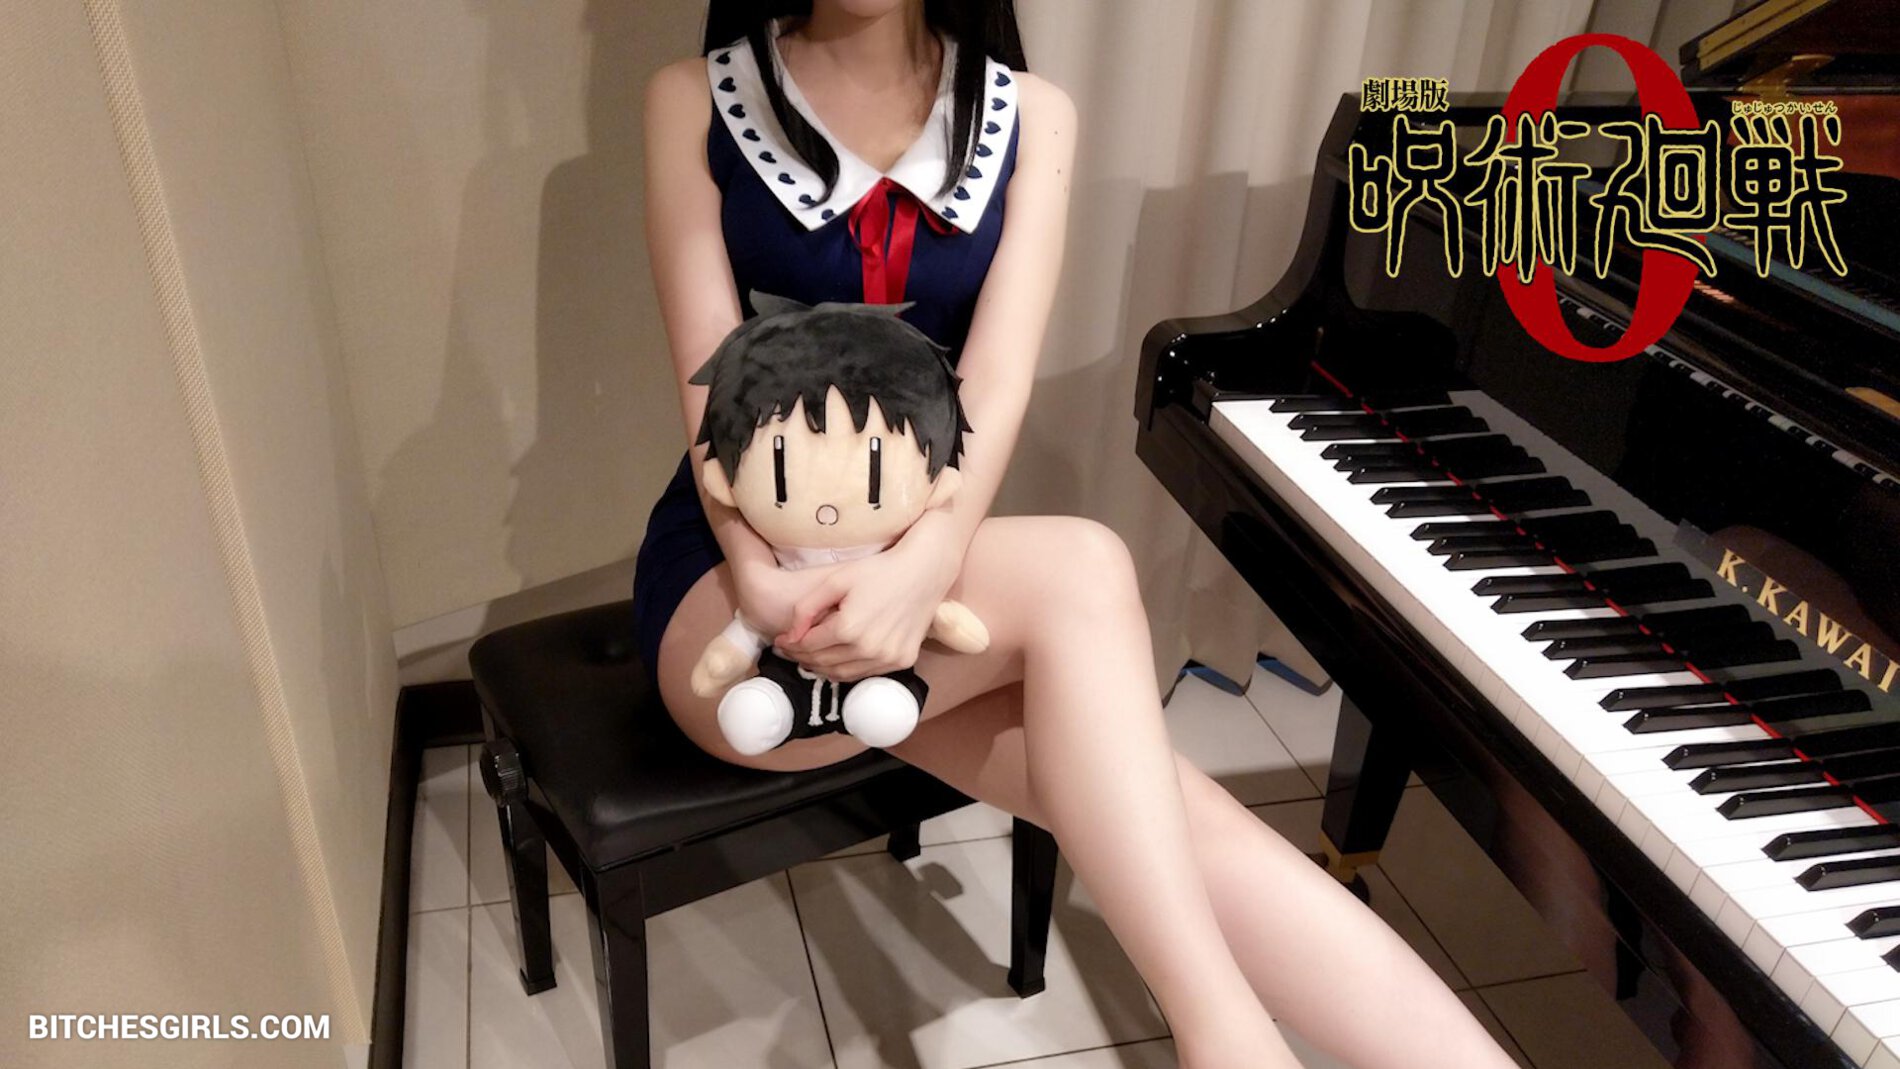 PanPiano Asian Nude Youtuber Patreon Leaked Paid Content